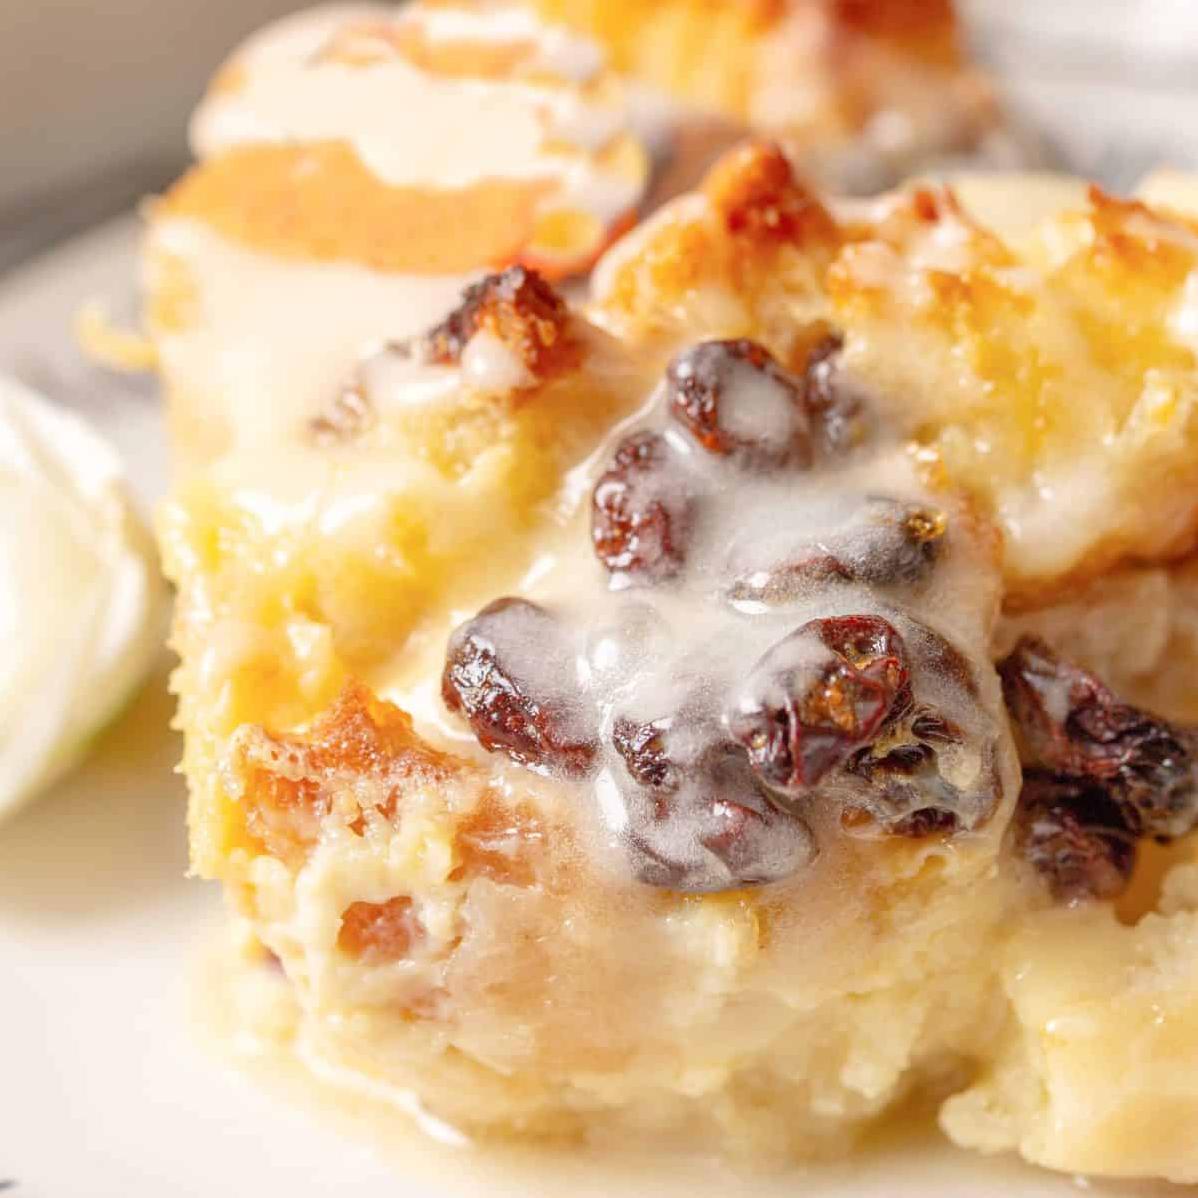  A spoonful of bread pudding ready to melt in your mouth.